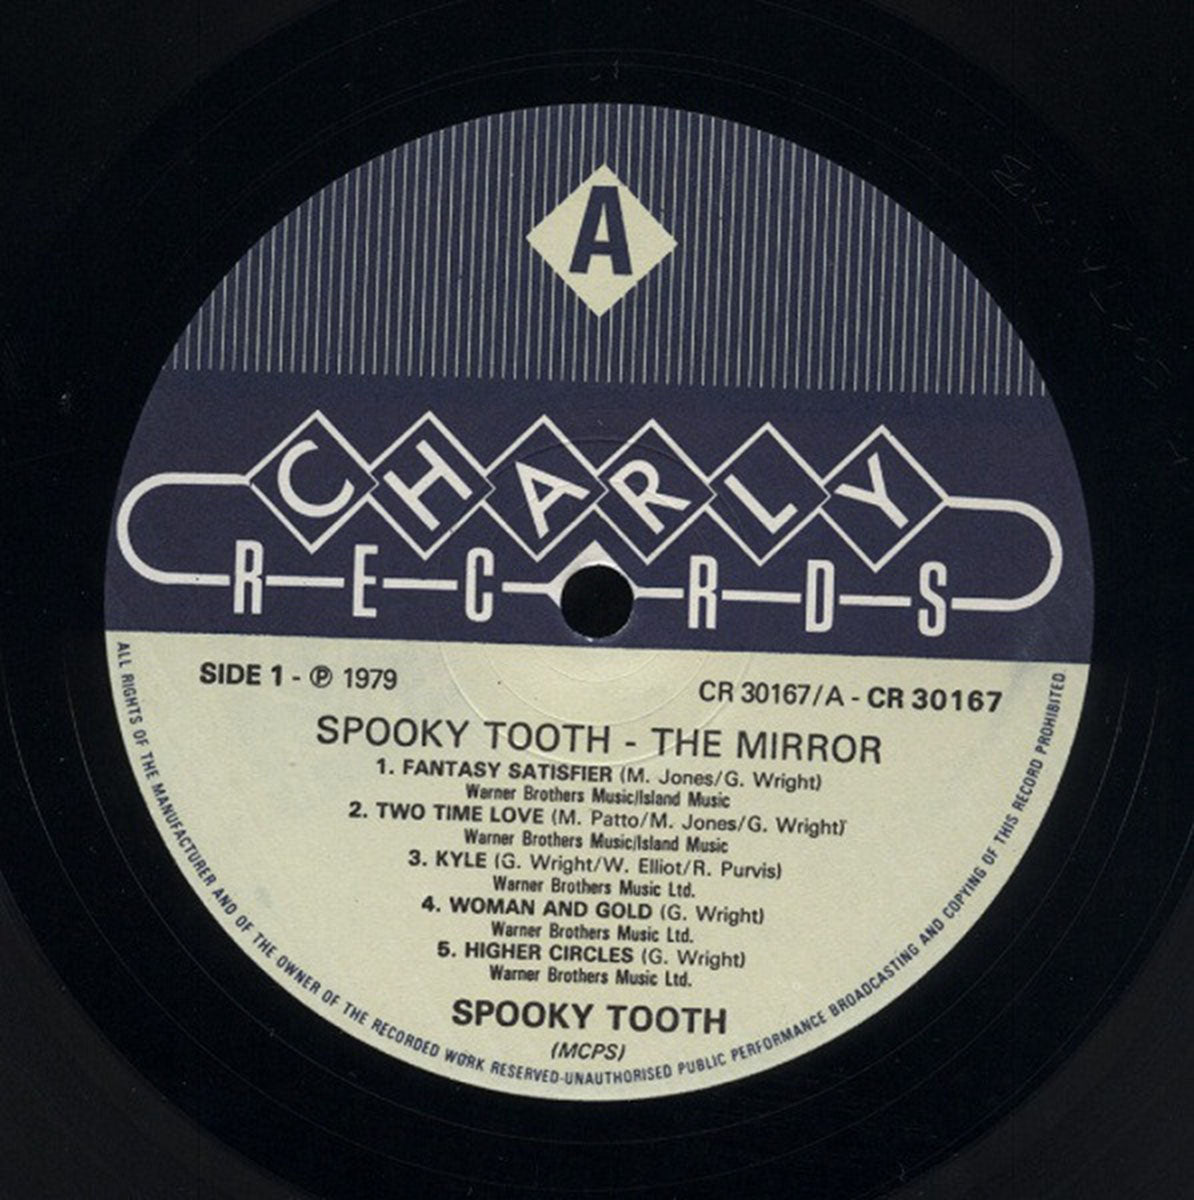 Spooky Tooth – The Mirror - UK Pressing